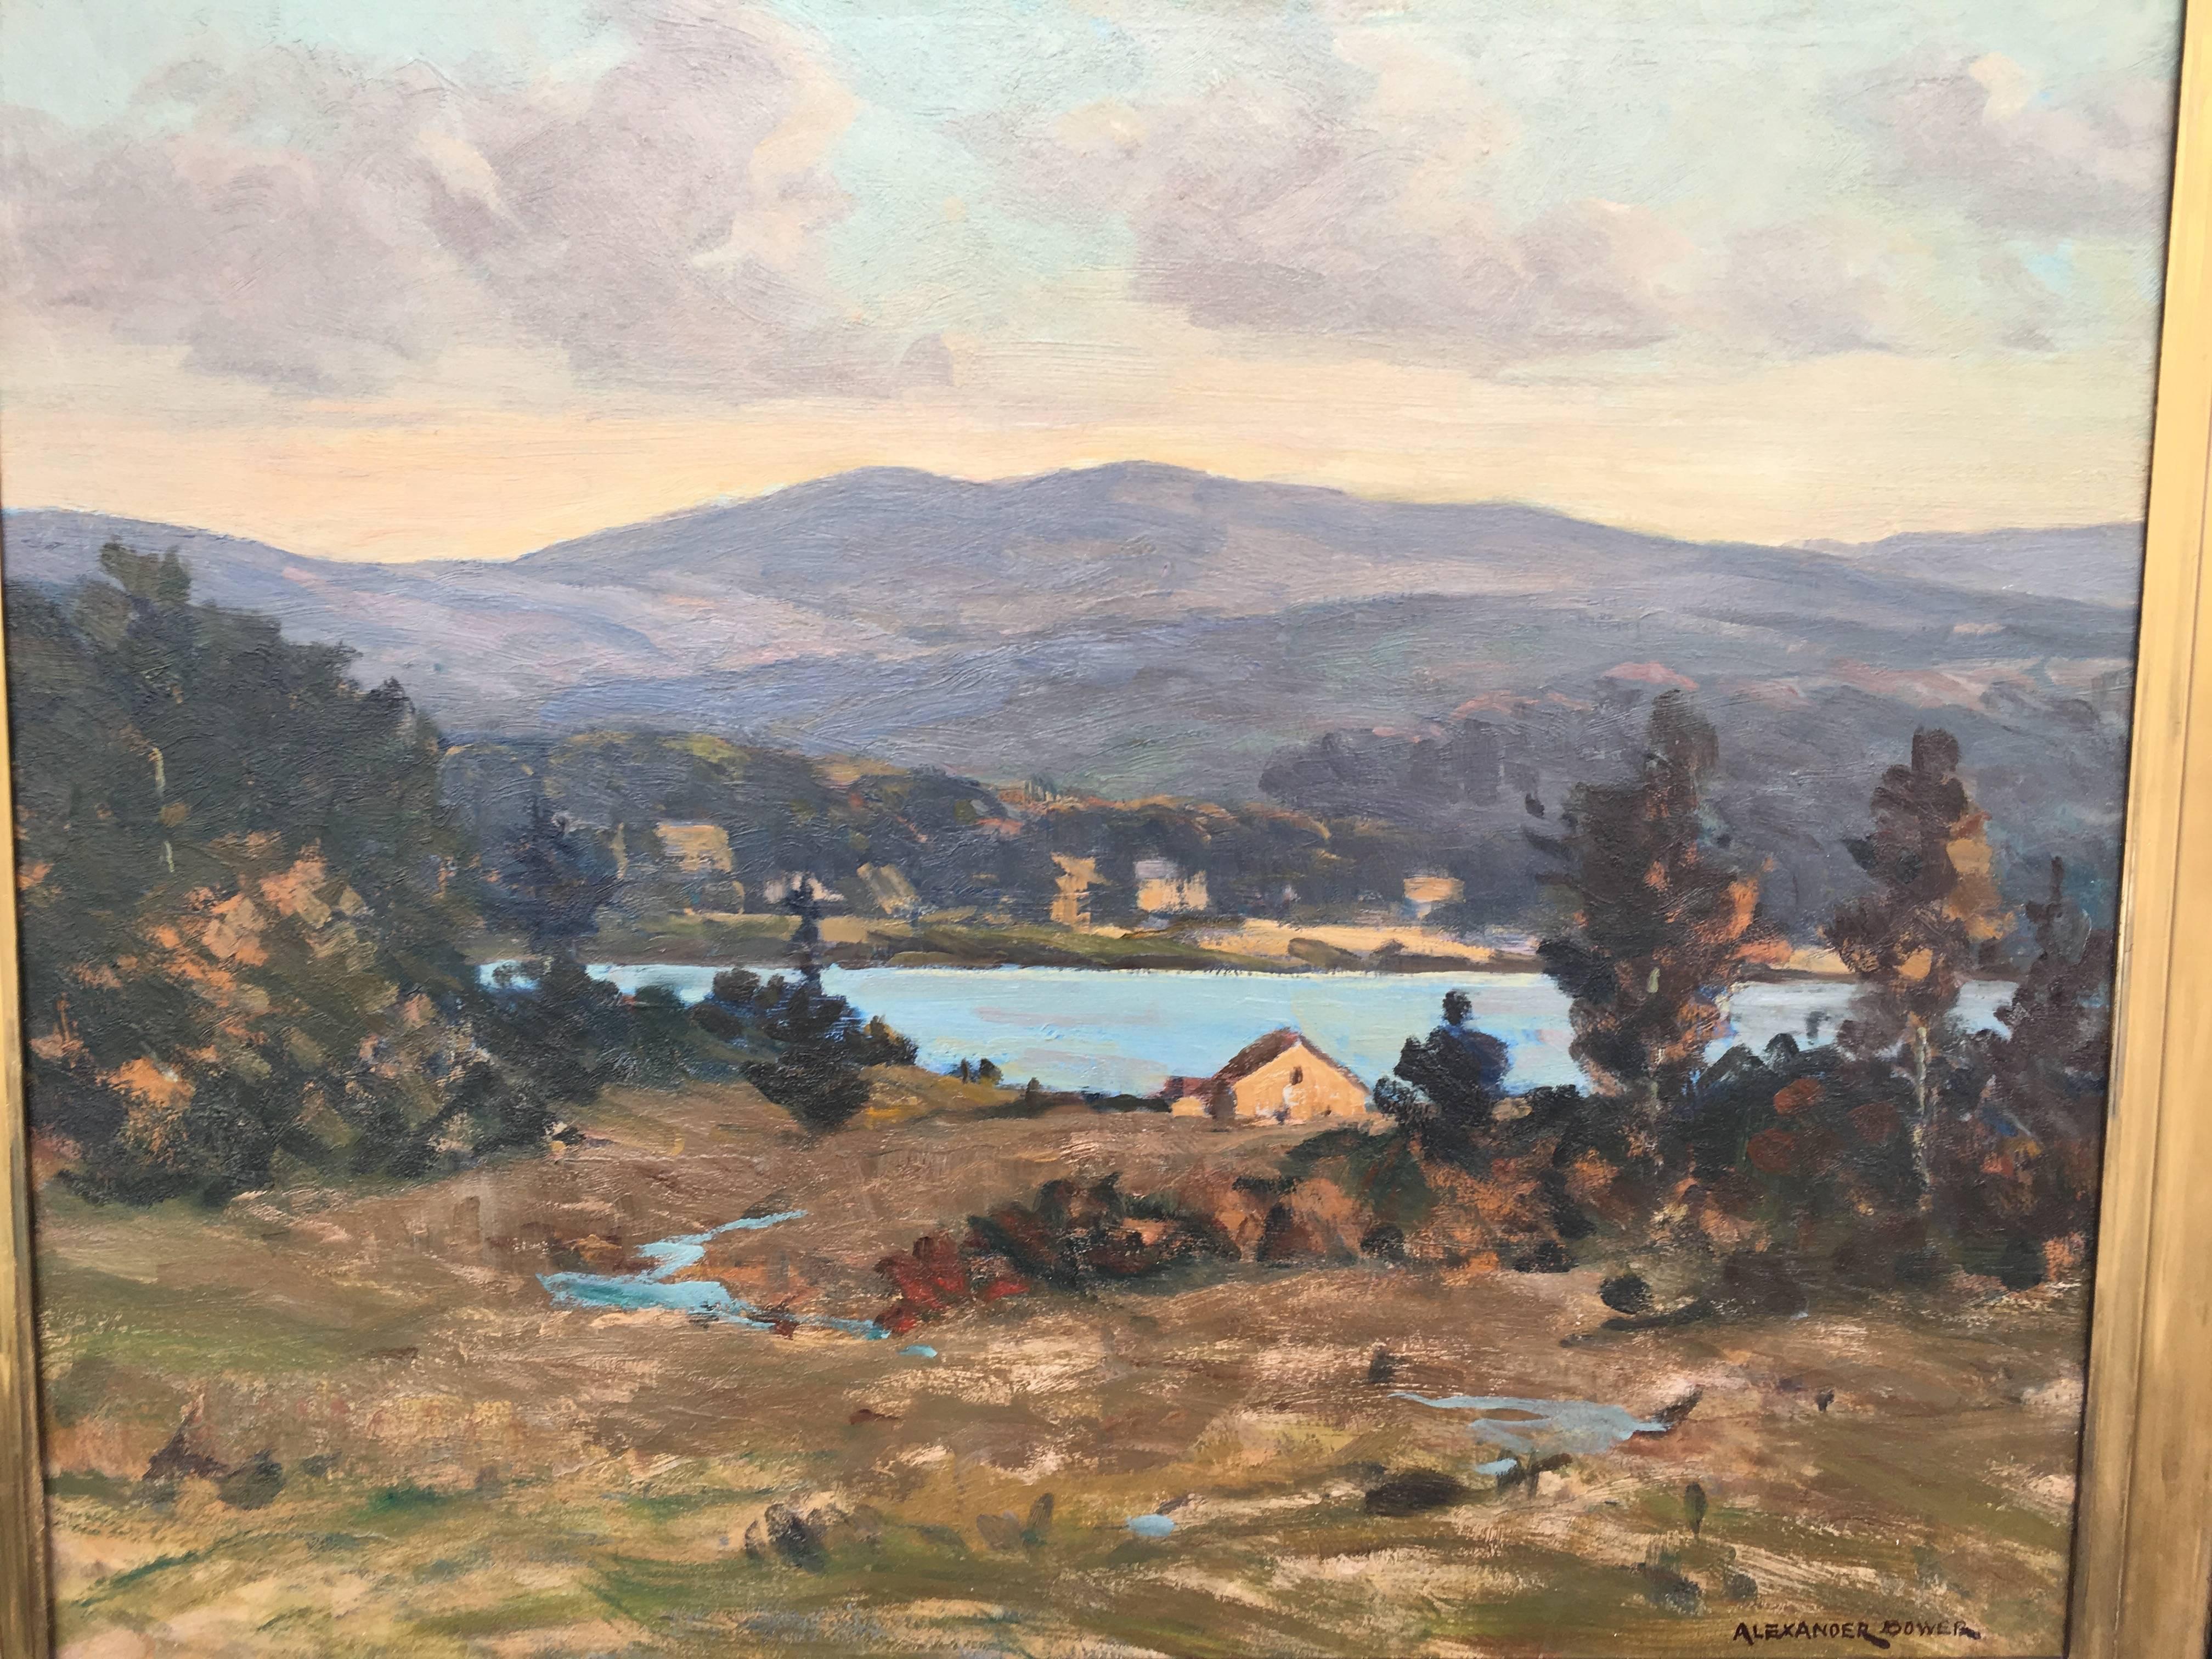 Exhibited at Panama-Pacific Exposition, San Francisco, 1915
“Alexander Bower, noted artist, came to Santa Cruz in 1915 and conducted classes and brought paintings from ‘Monhegan’ which depicted its beauty.” per Santa Cruz Sentinel, April 2, 1957,